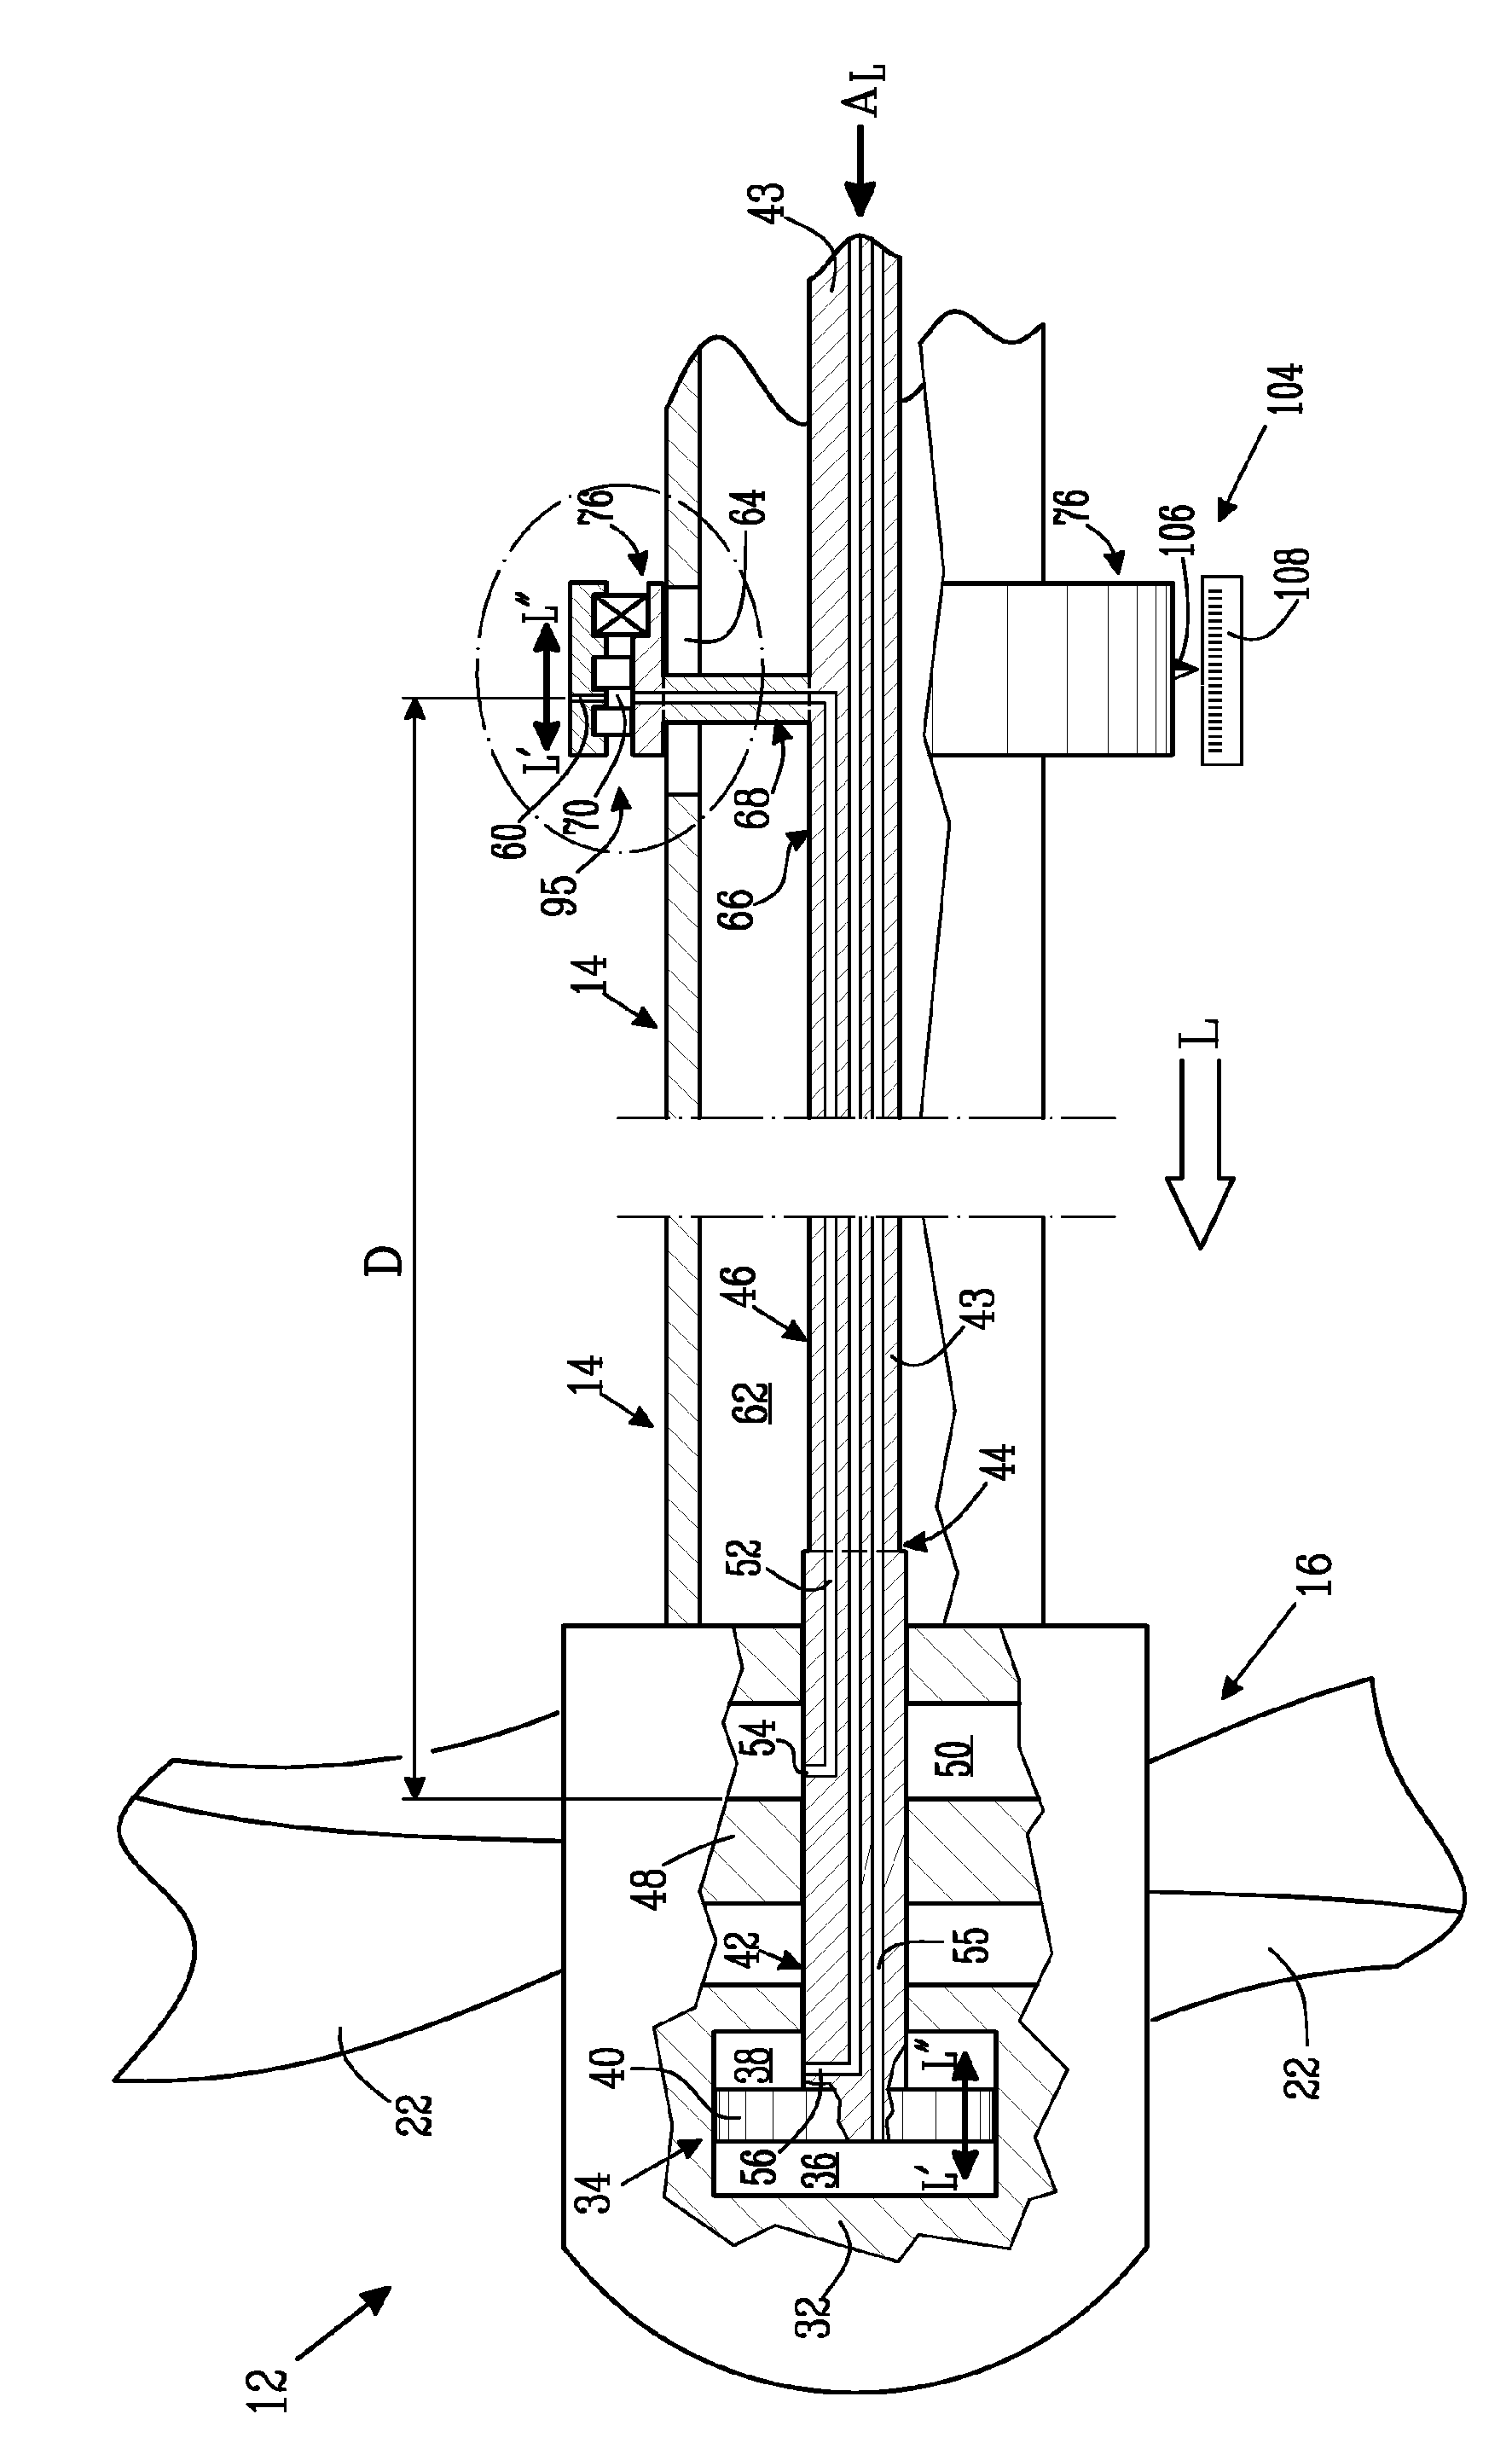 An adjustable propeller arrangement and a method of distributing fluid to and/or from such an adjustable propeller arrangement